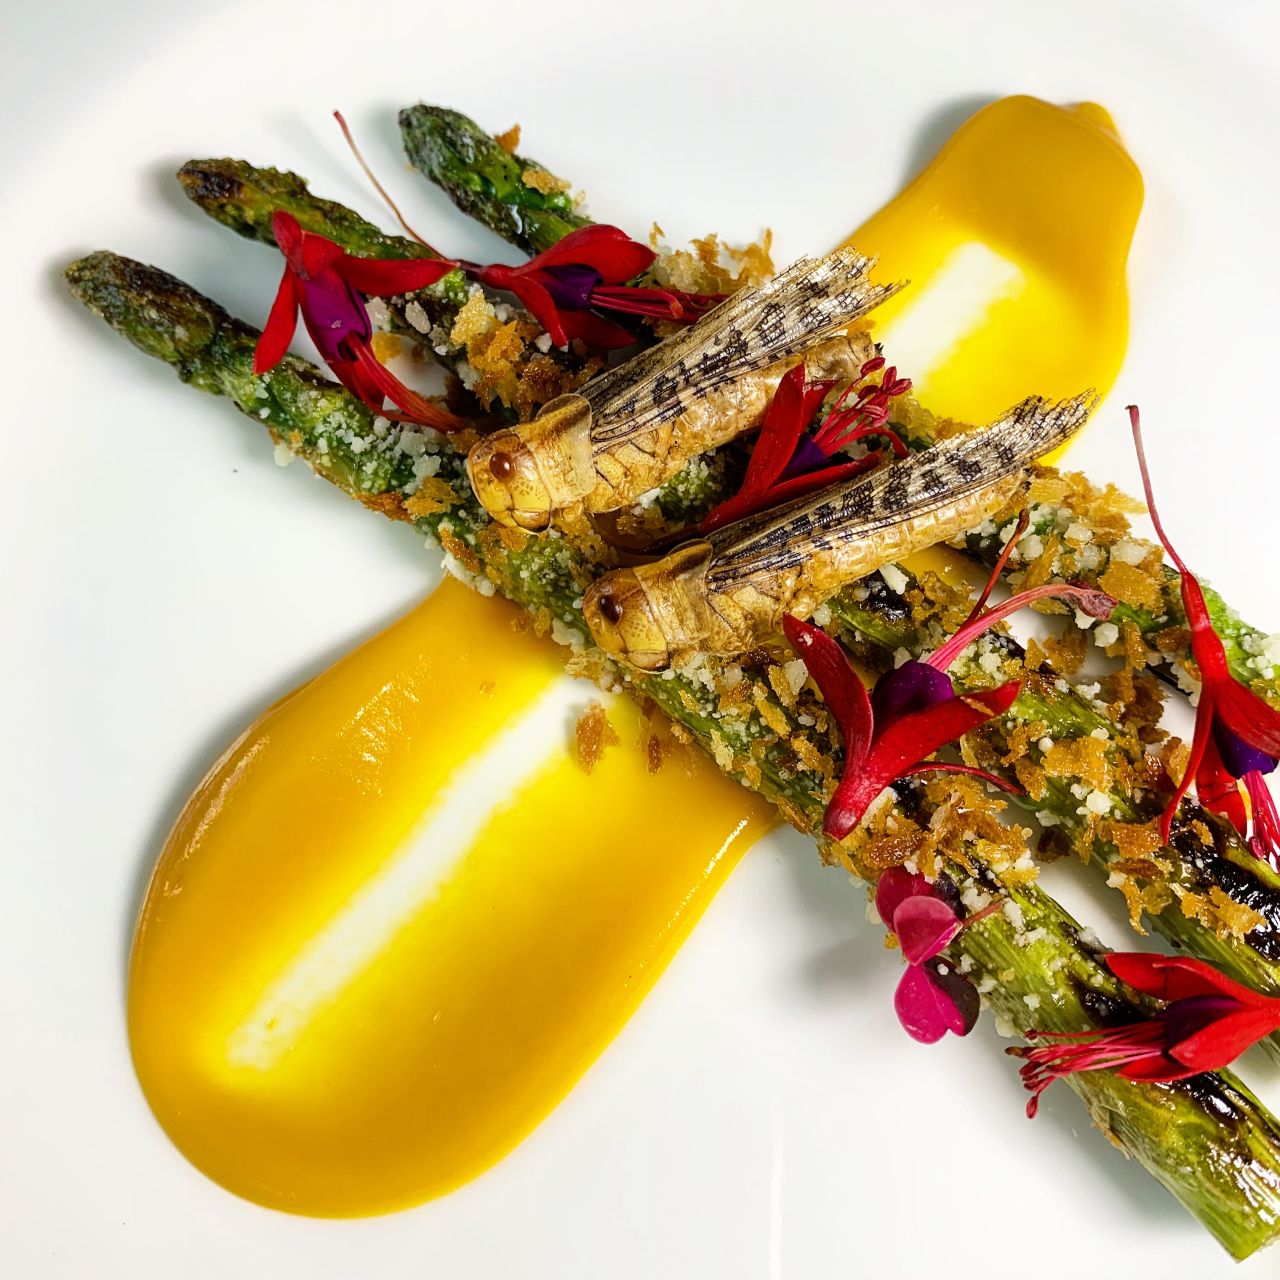 As a self-styled edible-insect ambassador, the chef believes these can be a nutritious and tasty addition to our diets -- like this locust asparagus dish.